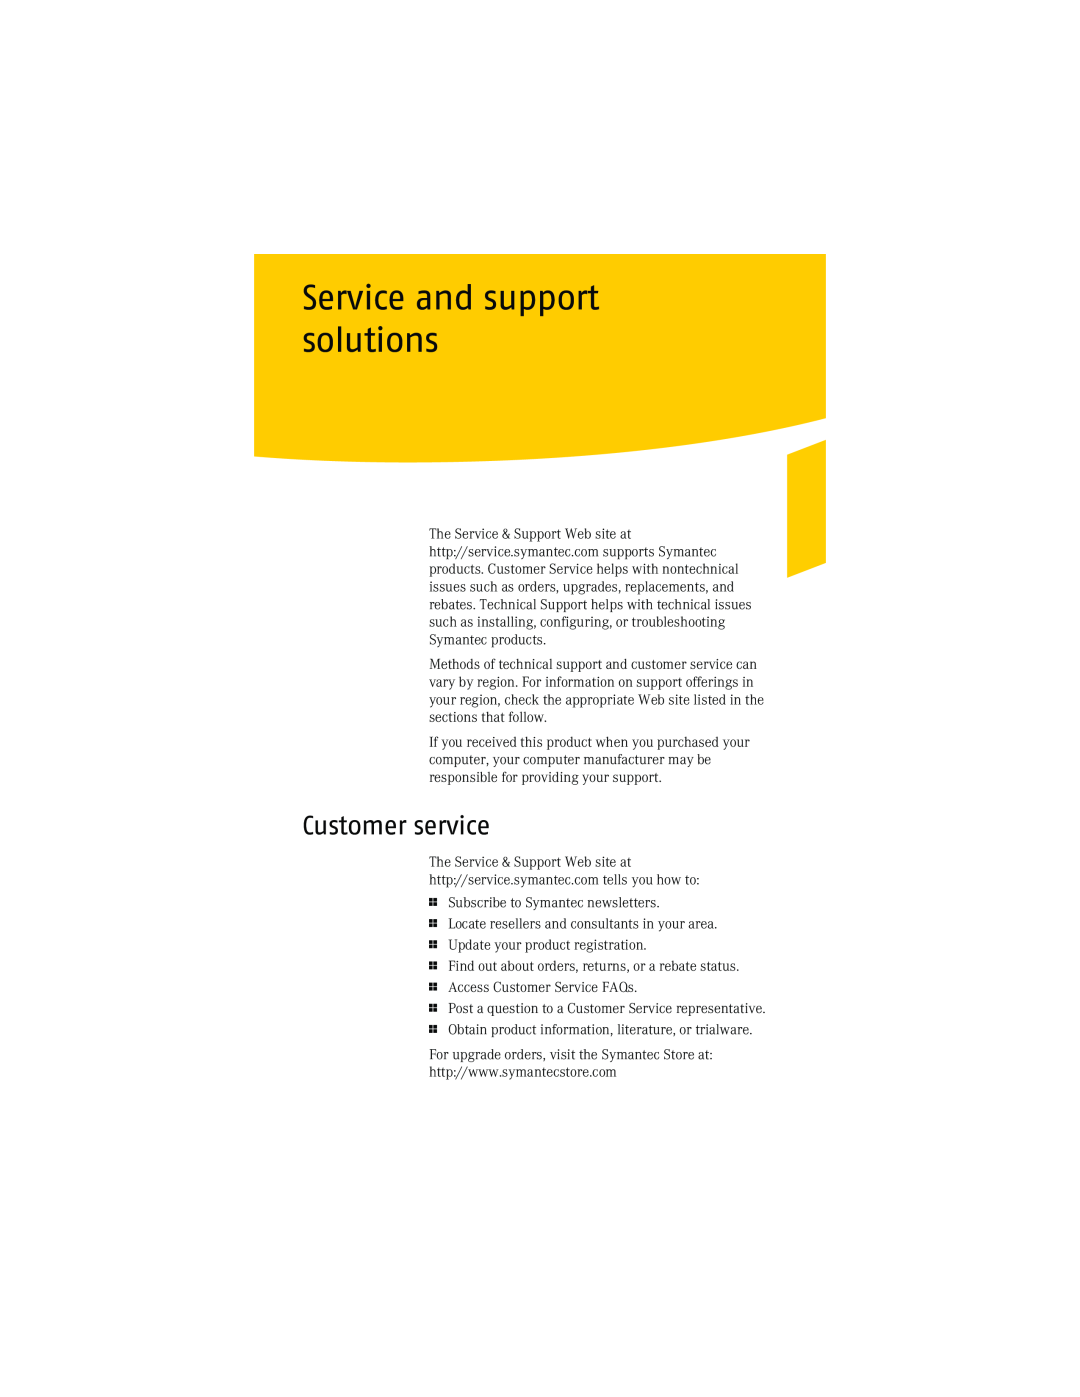 Symantec NIS2005 manual Service and support solutions, Customer service 